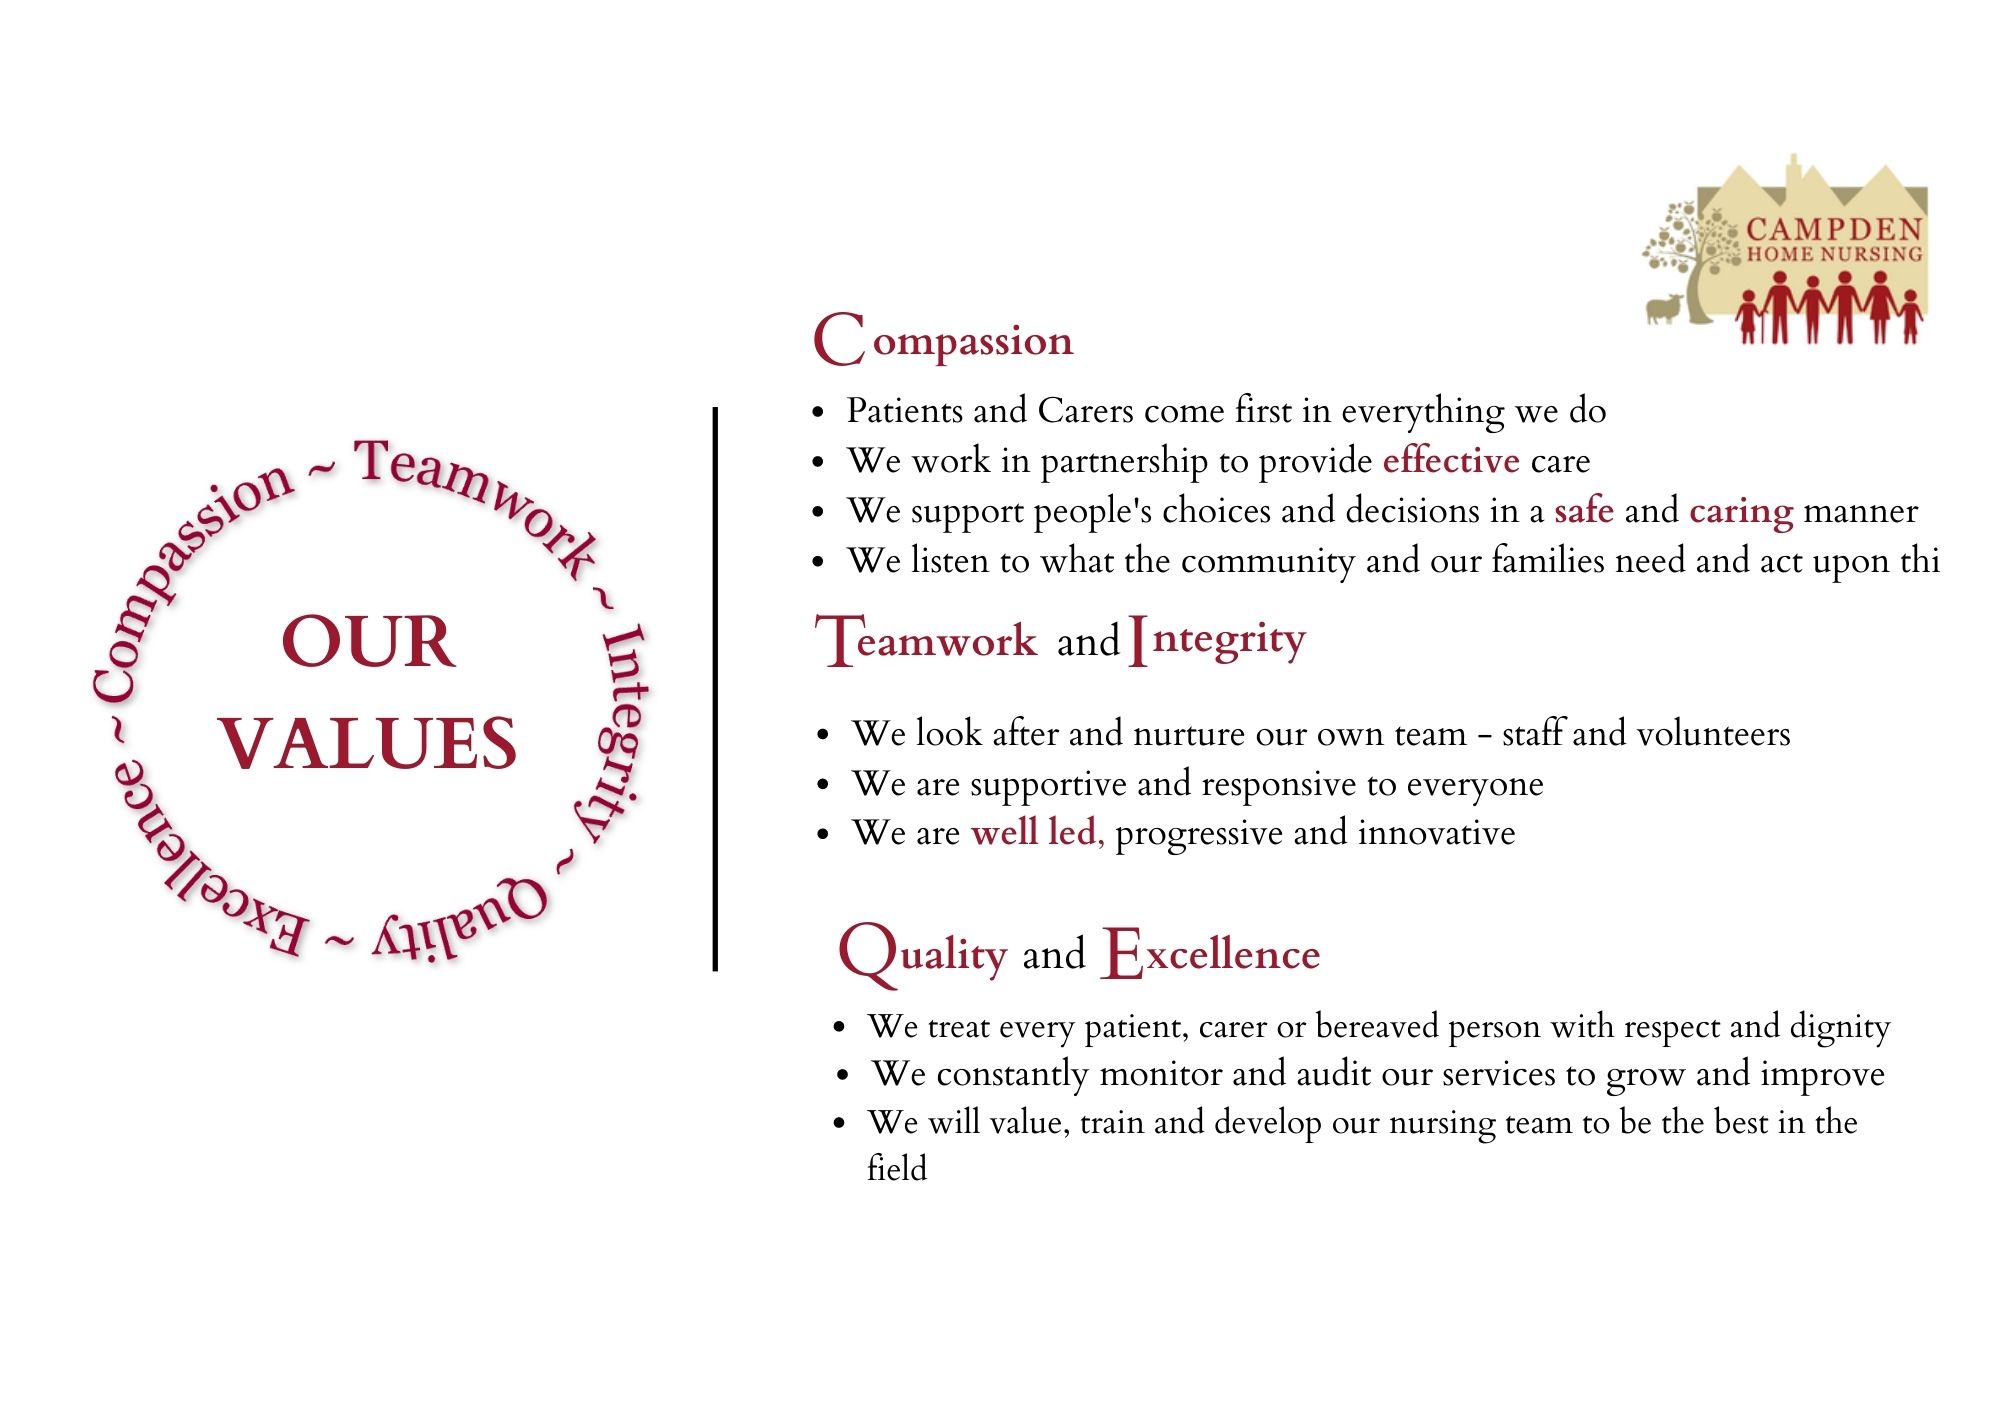 Our Values image